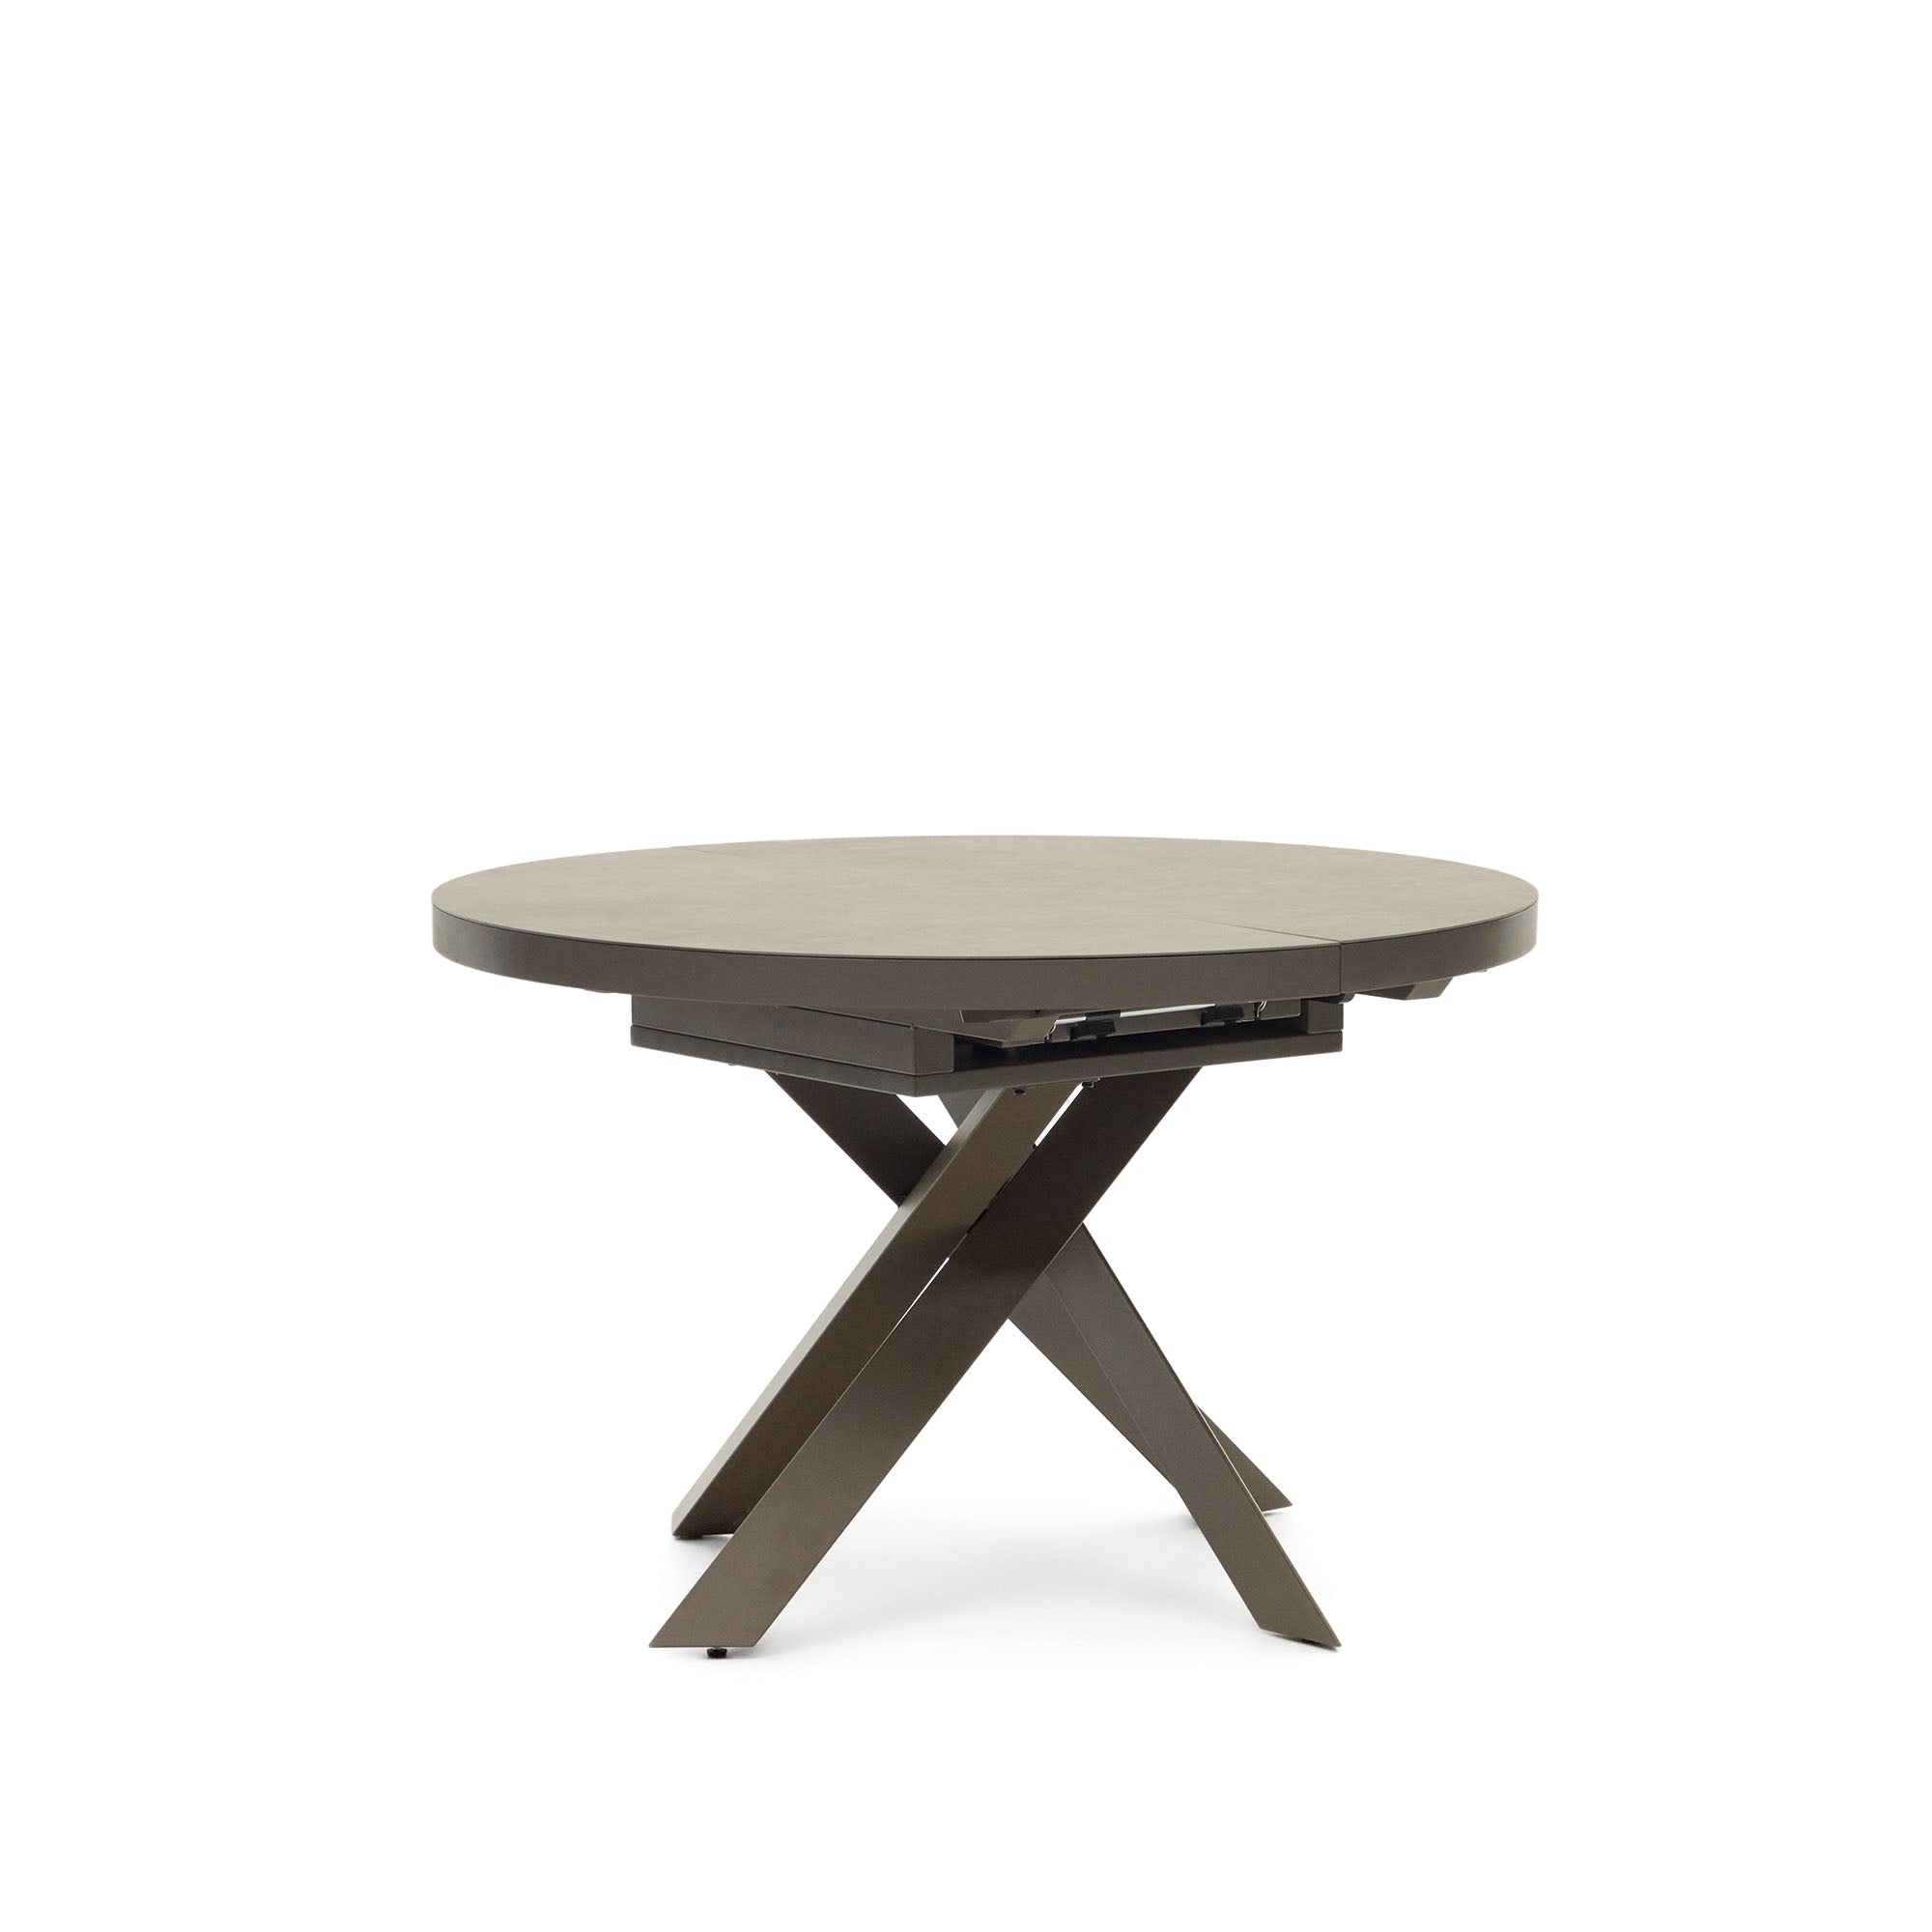 Vashti round extendable table, porcelain and steel legs with a brown finish, Ø 120(160) cm